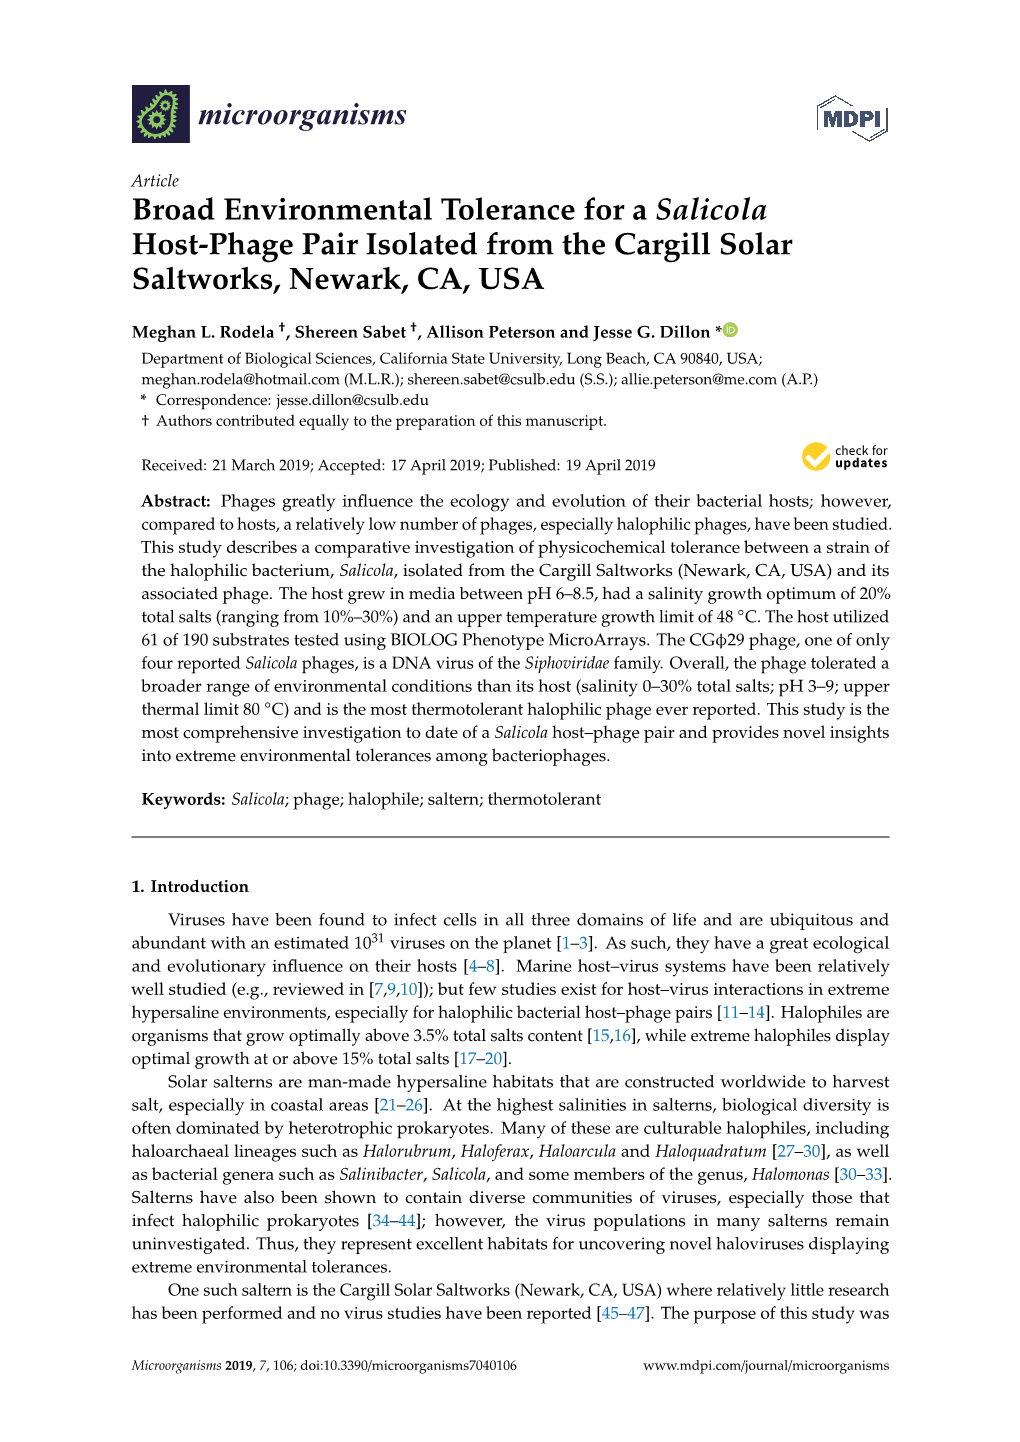 Broad Environmental Tolerance for a Salicola Host-Phage Pair Isolated from the Cargill Solar Saltworks, Newark, CA, USA